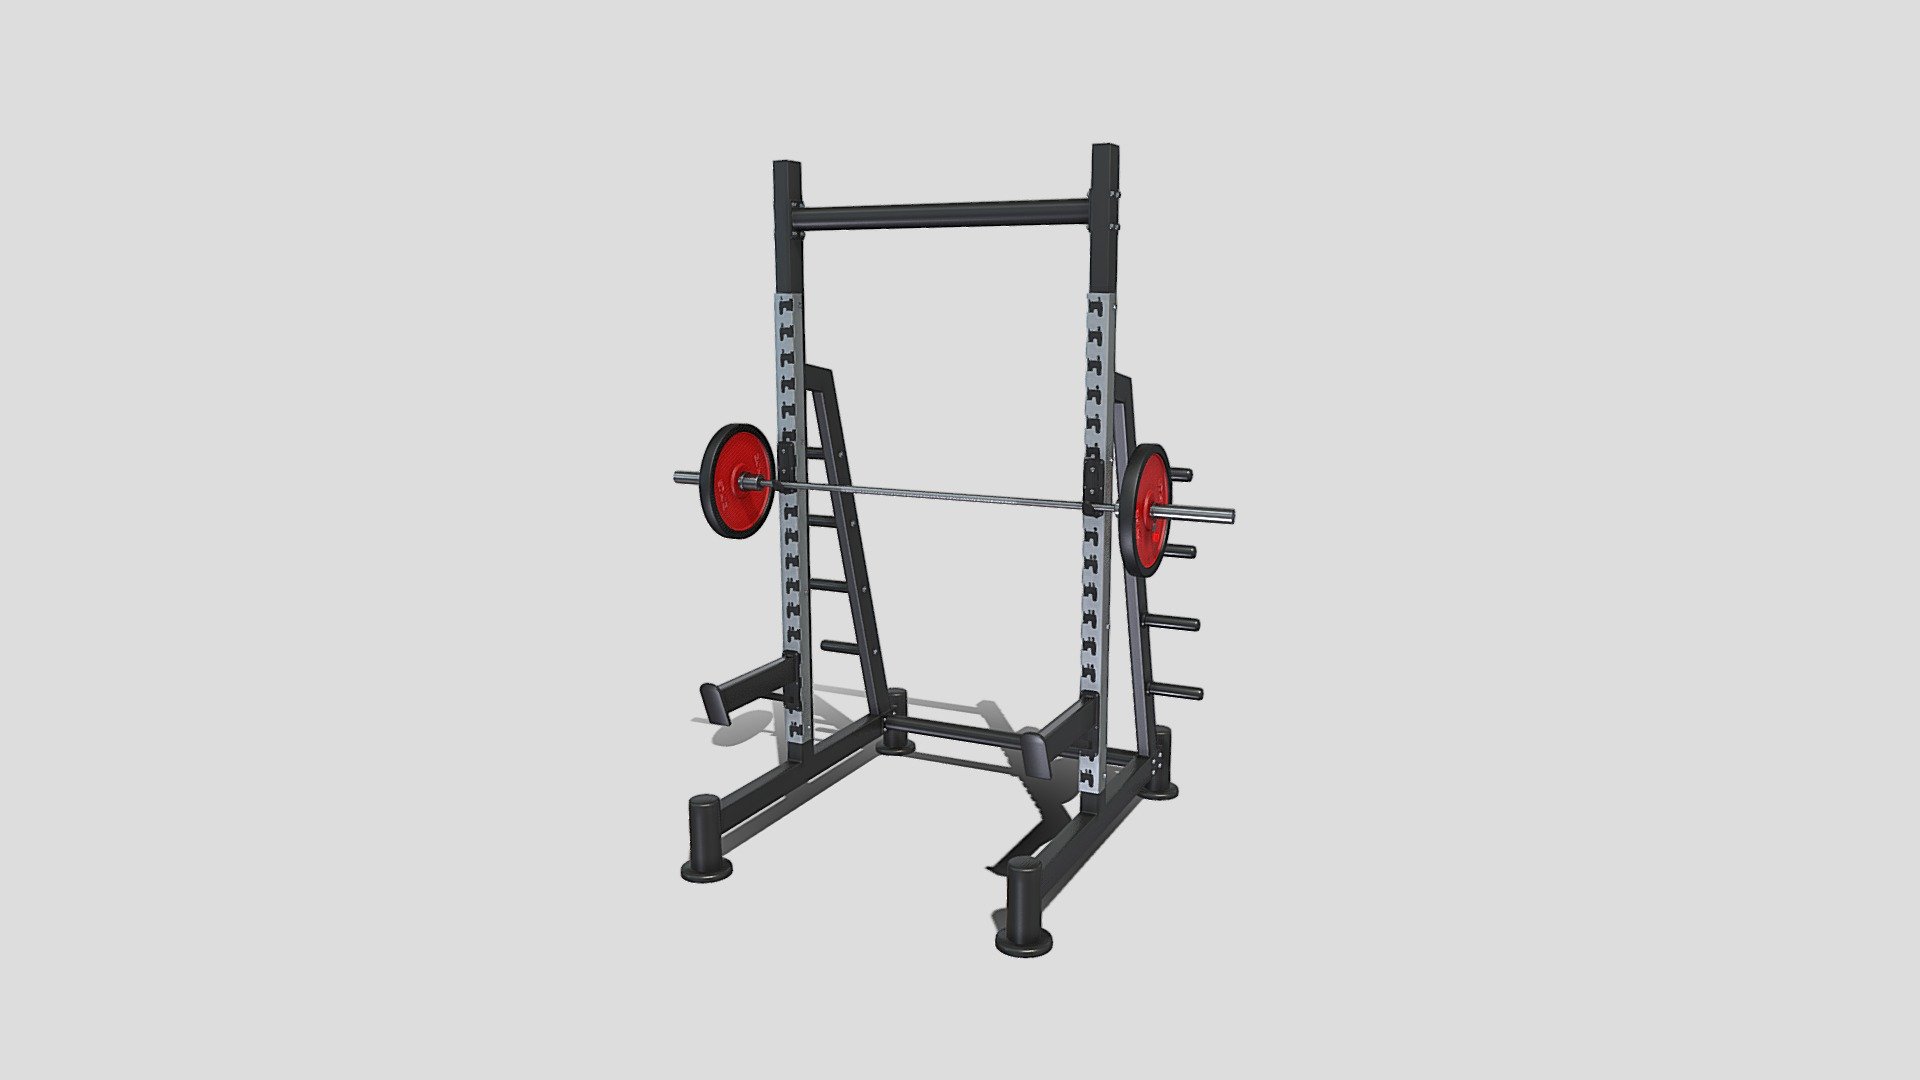 Gym machine 3d model built to real size, rendered with Cycles in Blender, as per seen on attached images. 

File formats:
-.blend, rendered with cycles, as seen in the images;
-.obj, with materials applied;
-.dae, with materials applied;
-.fbx, with materials applied;
-.stl;

Files come named appropriately and split by file format.

3D Software:
The 3D model was originally created in Blender 3.1 and rendered with Cycles.

Materials and textures:
The models have materials applied in all formats, and are ready to import and render.
Materials are image based using PBR, the model comes with five 4k png image textures.

Preview scenes:
The preview images are rendered in Blender using its built-in render engine &lsquo;Cycles'.
Note that the blend files come directly with the rendering scene included and the render command will generate the exact result as seen in previews.

General:
The models are built mostly out of quads.

For any problems please feel free to contact me.

Don't forget to rate and enjoy! - Squat rack - Buy Royalty Free 3D model by dragosburian 3d model